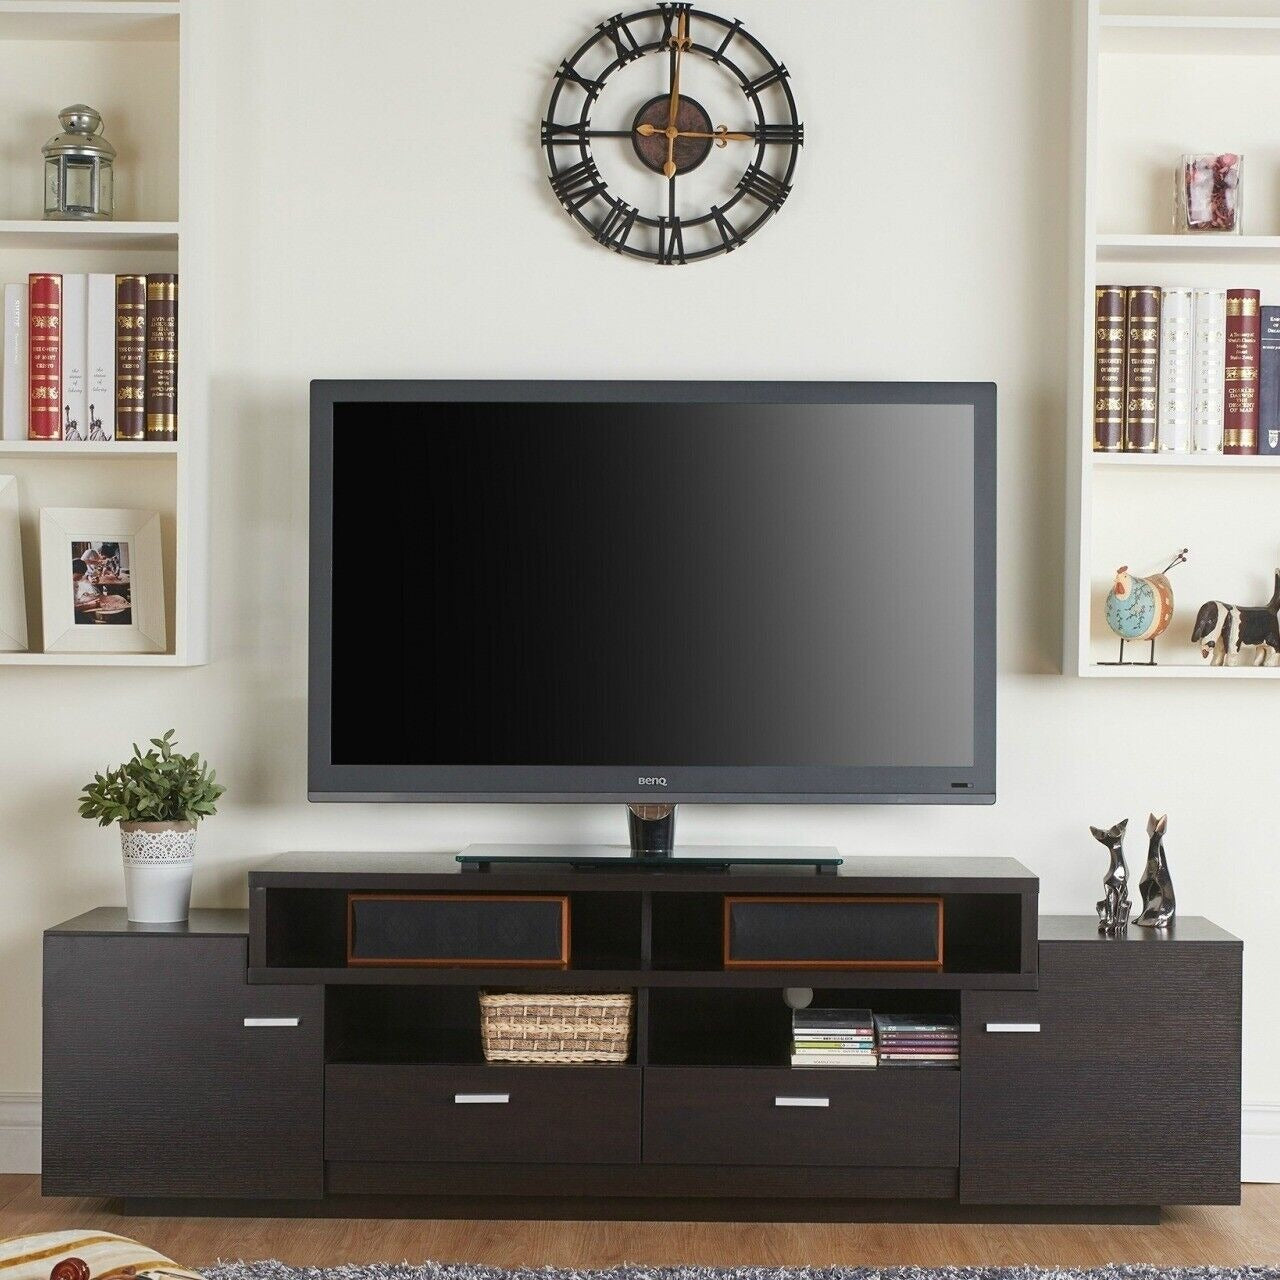 Tiered TV Stand Media Storage Entertainment Center for Large TV Cappuccino Fin